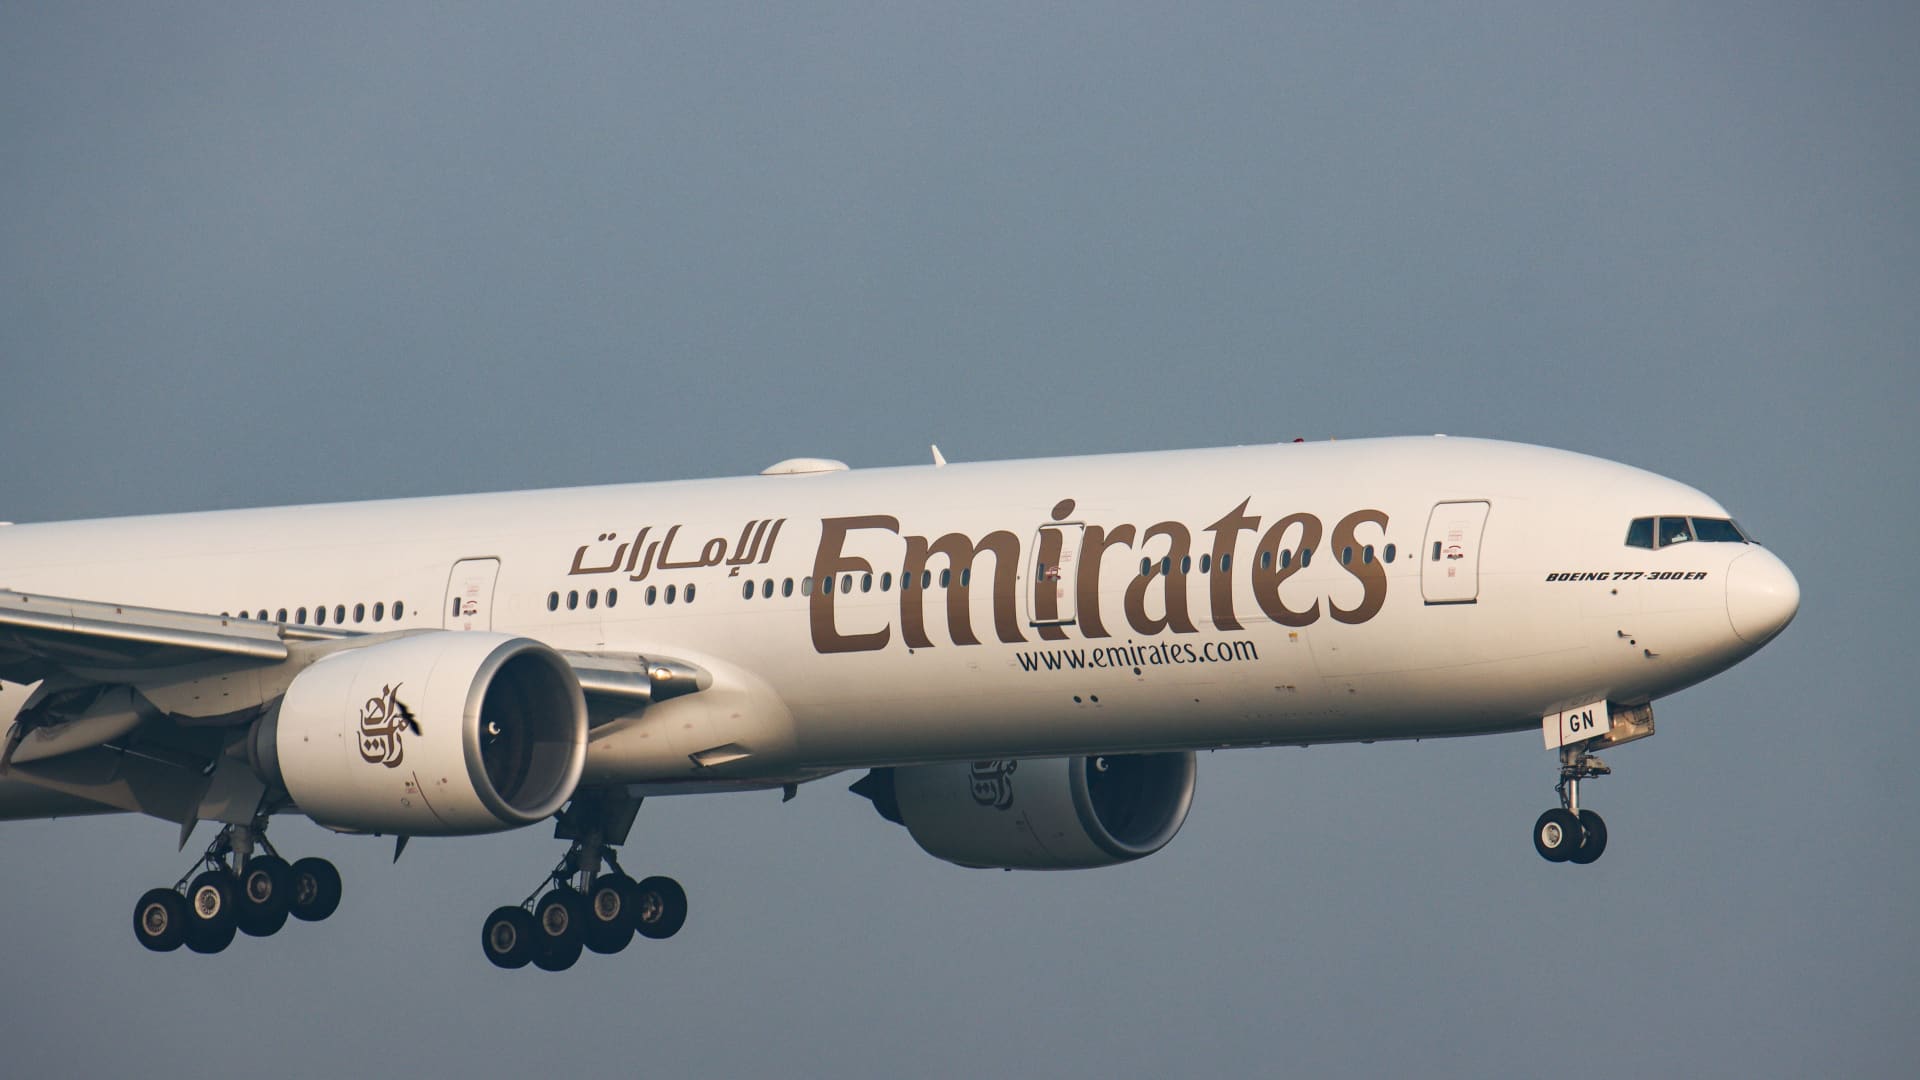 Dubai-owned Emirates is one of few major airlines to continue its direct flight service to Russia as other carriers cease operations over Moscow's invasion of Ukraine.